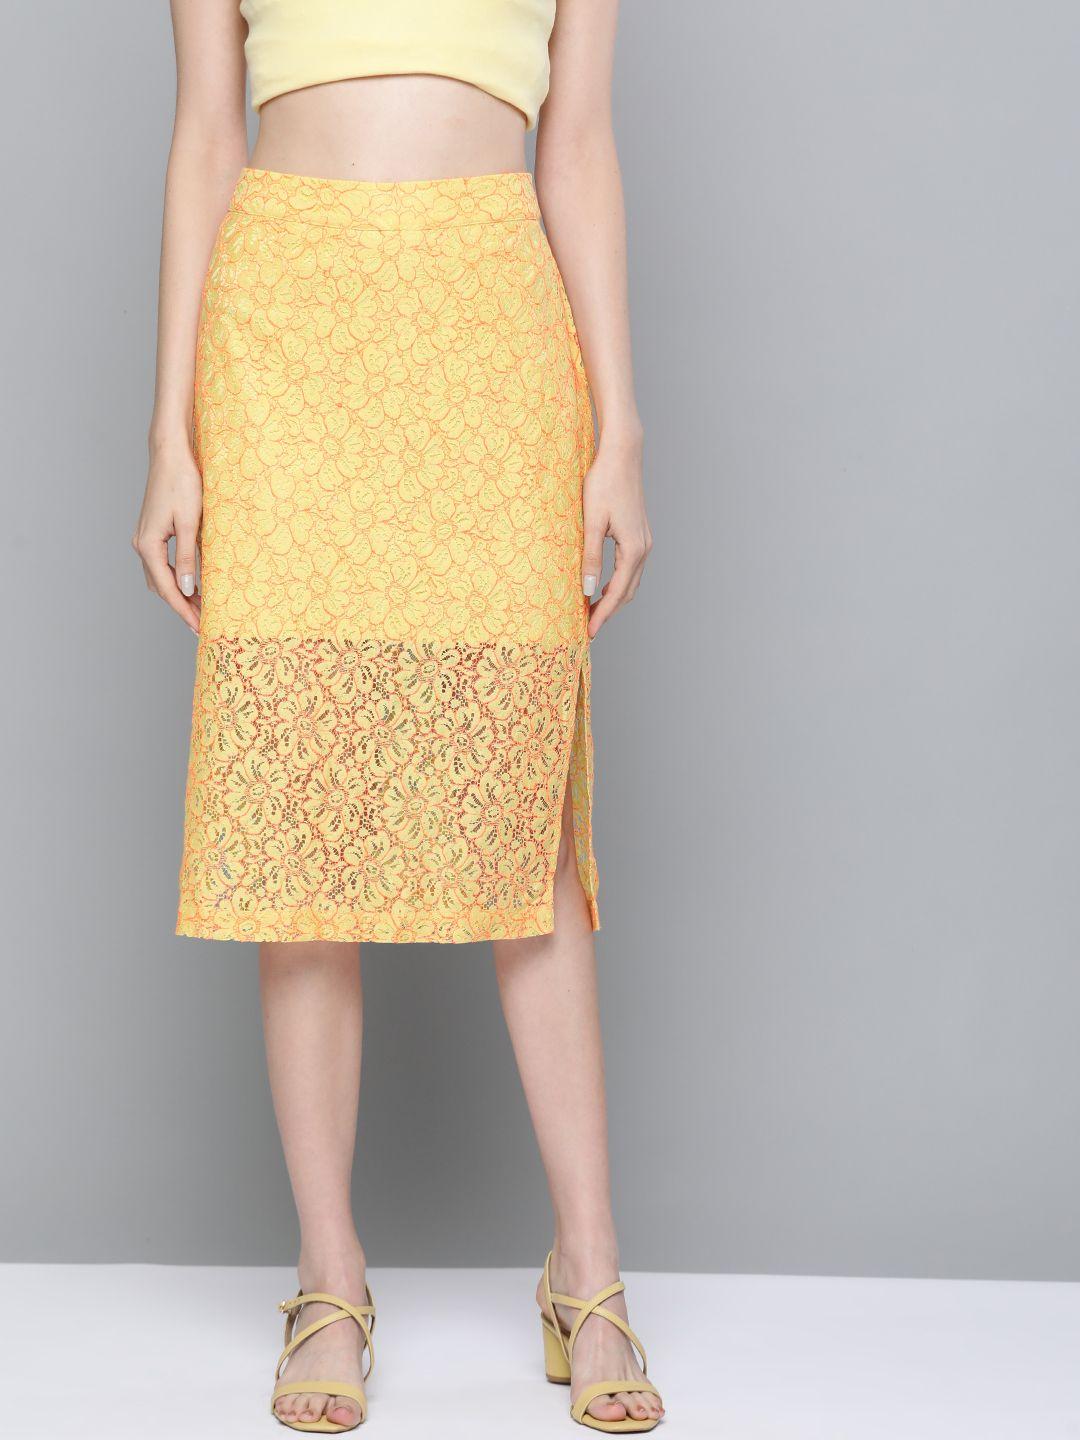 sassafras women mustard yellow & pink floral lace design midi a-line skirt with side slit